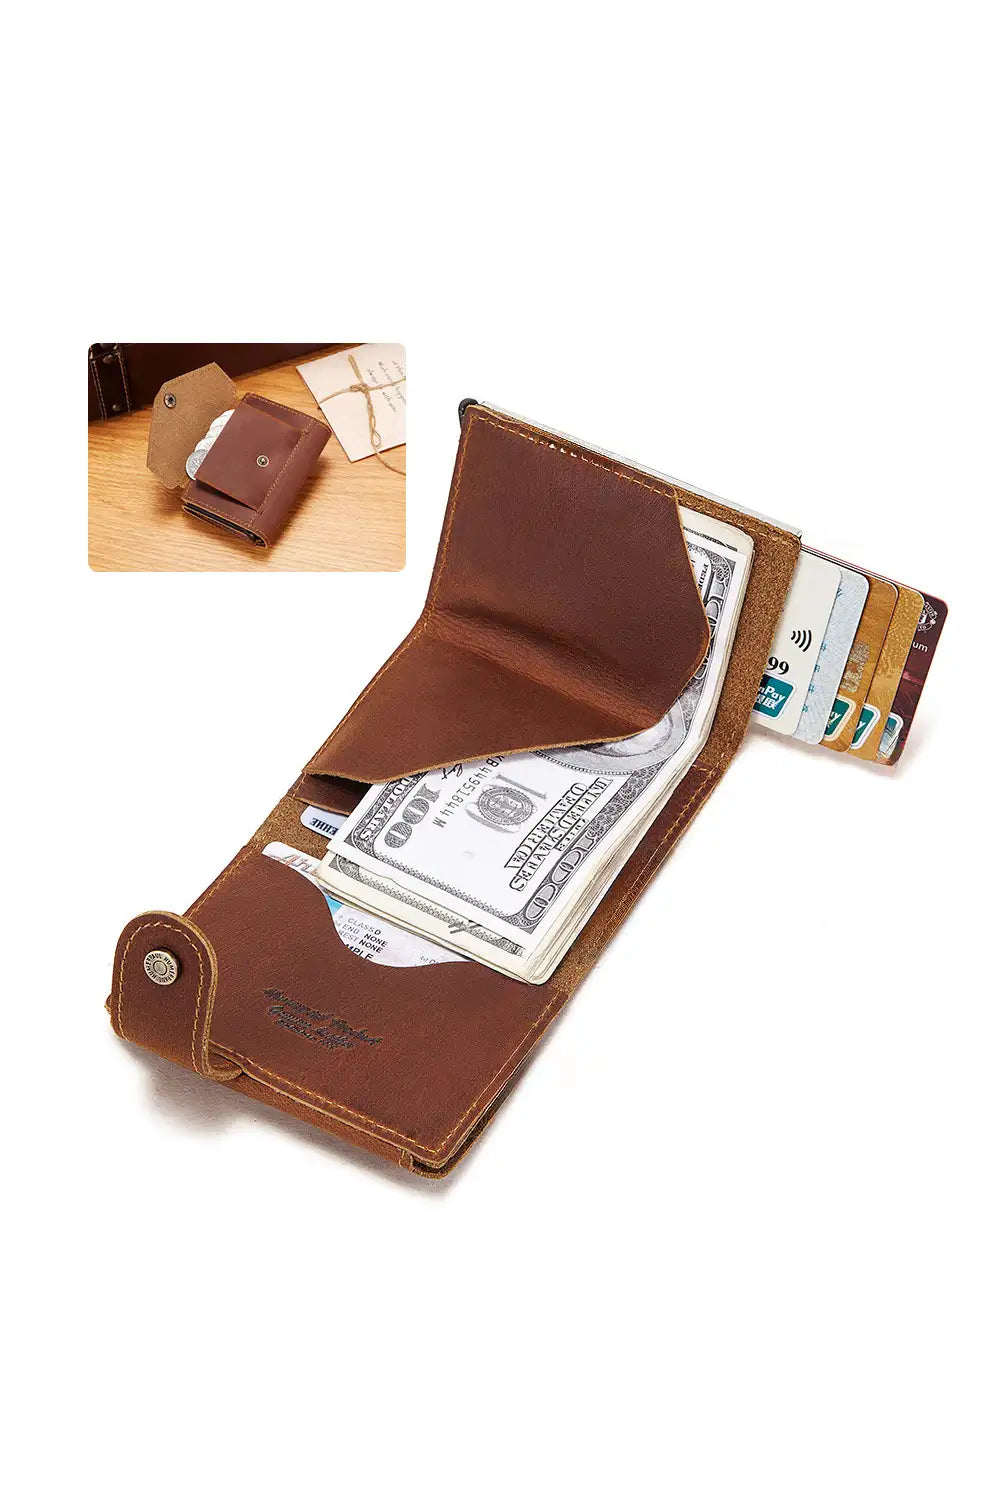 Organizer Compact Genuine Cowhide Leather Wallet